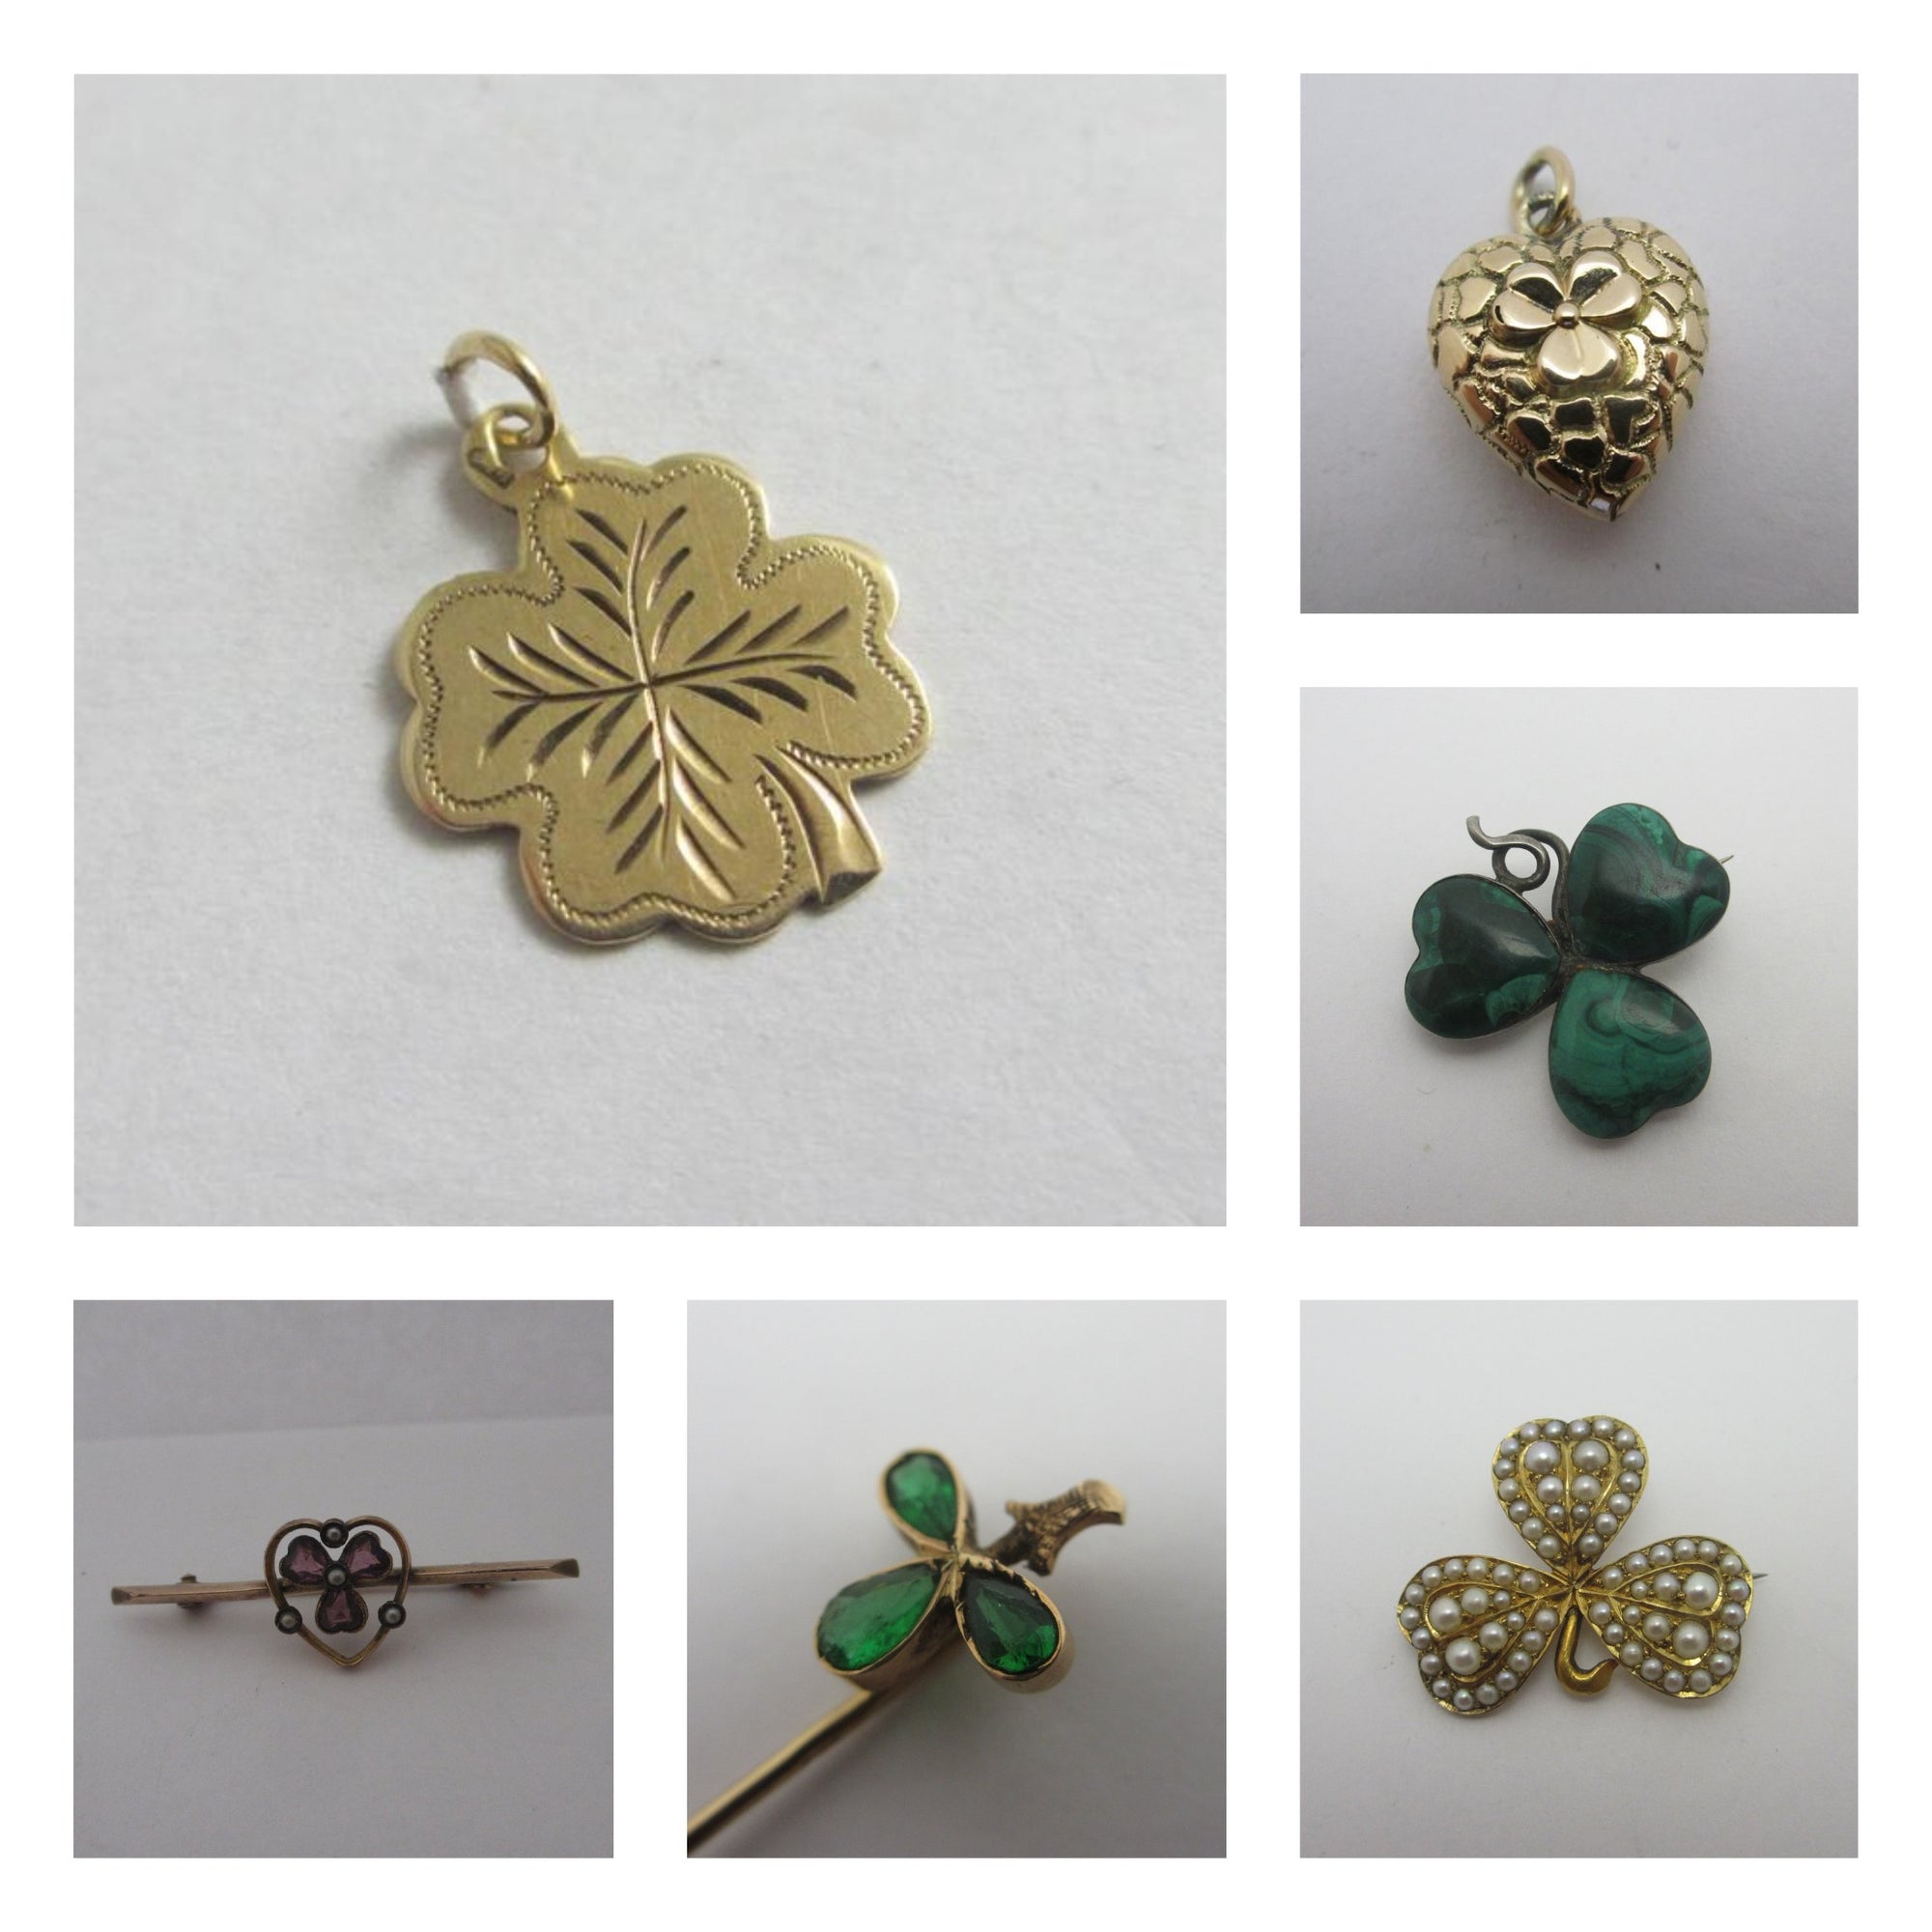 Find a Lucky Charm At Top Banana Antiques On St Patricks Day !